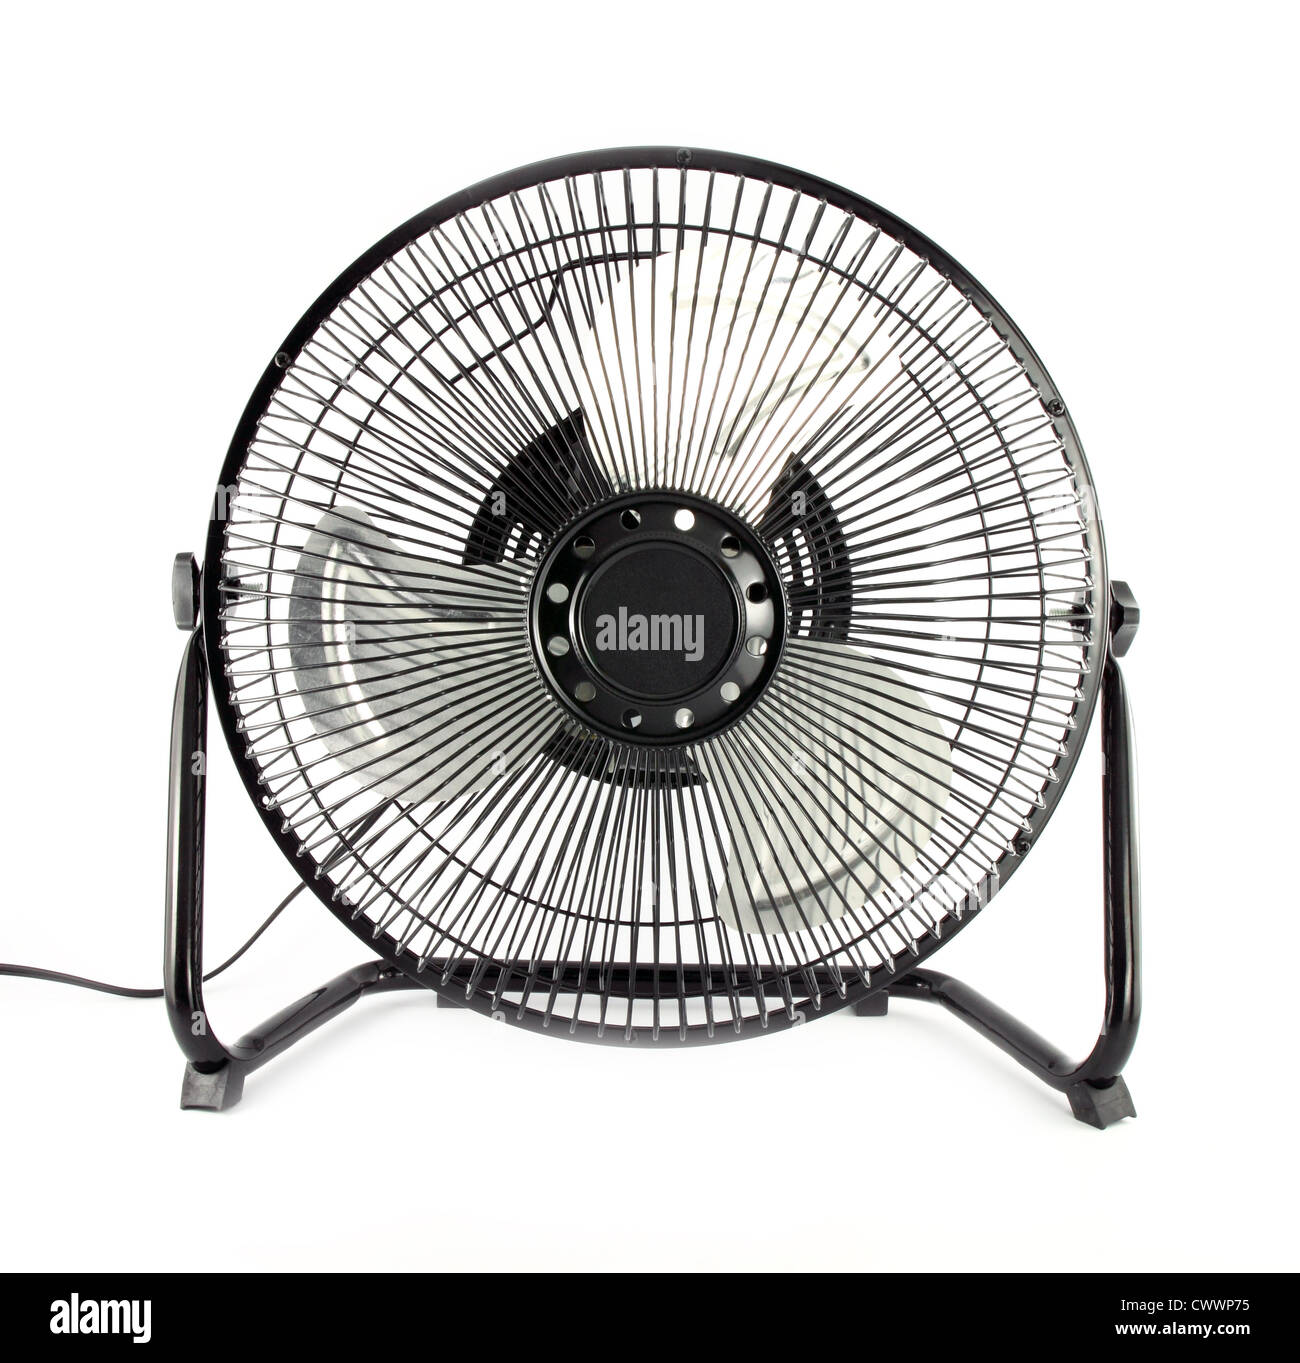 The black mini fan to reduce some hot weather Stock Photo